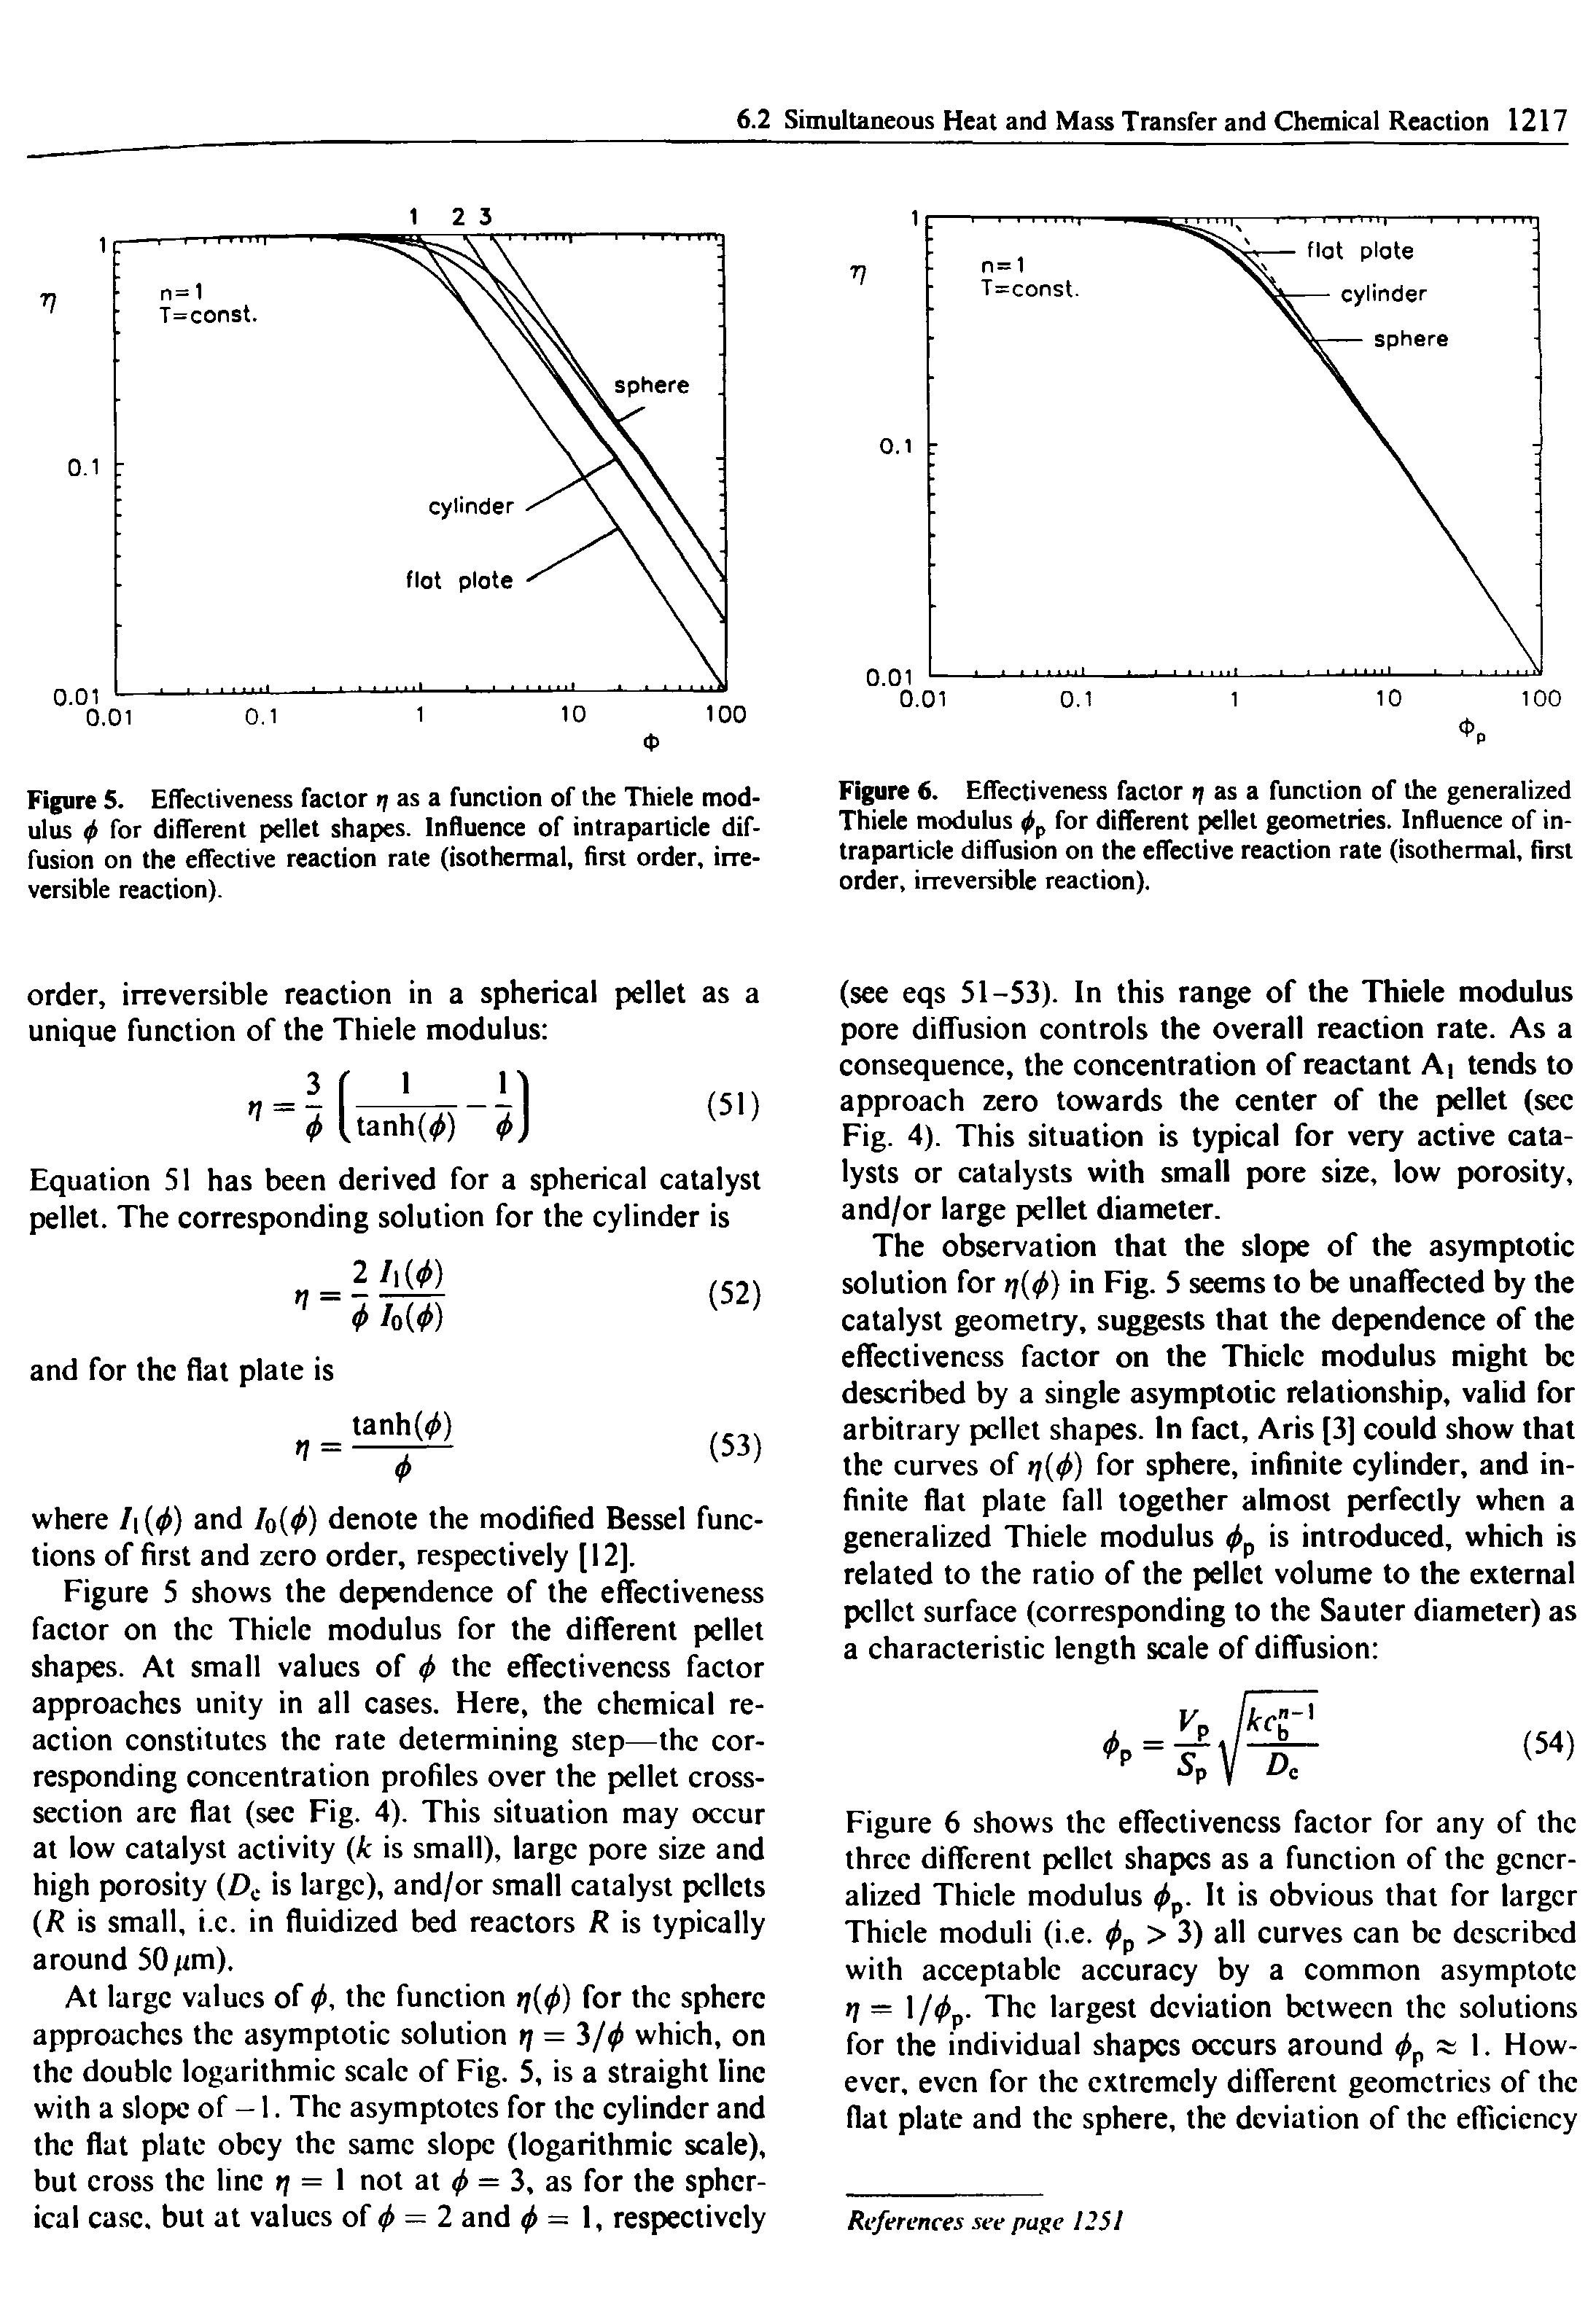 Figure 6. Effectiveness factor rj as a function of the generalized Thiele modulus <j>f for different pellet geometries. Influence of intraparticle diffusion on the effective reaction rate (isothermal, first order, irreversible reaction).